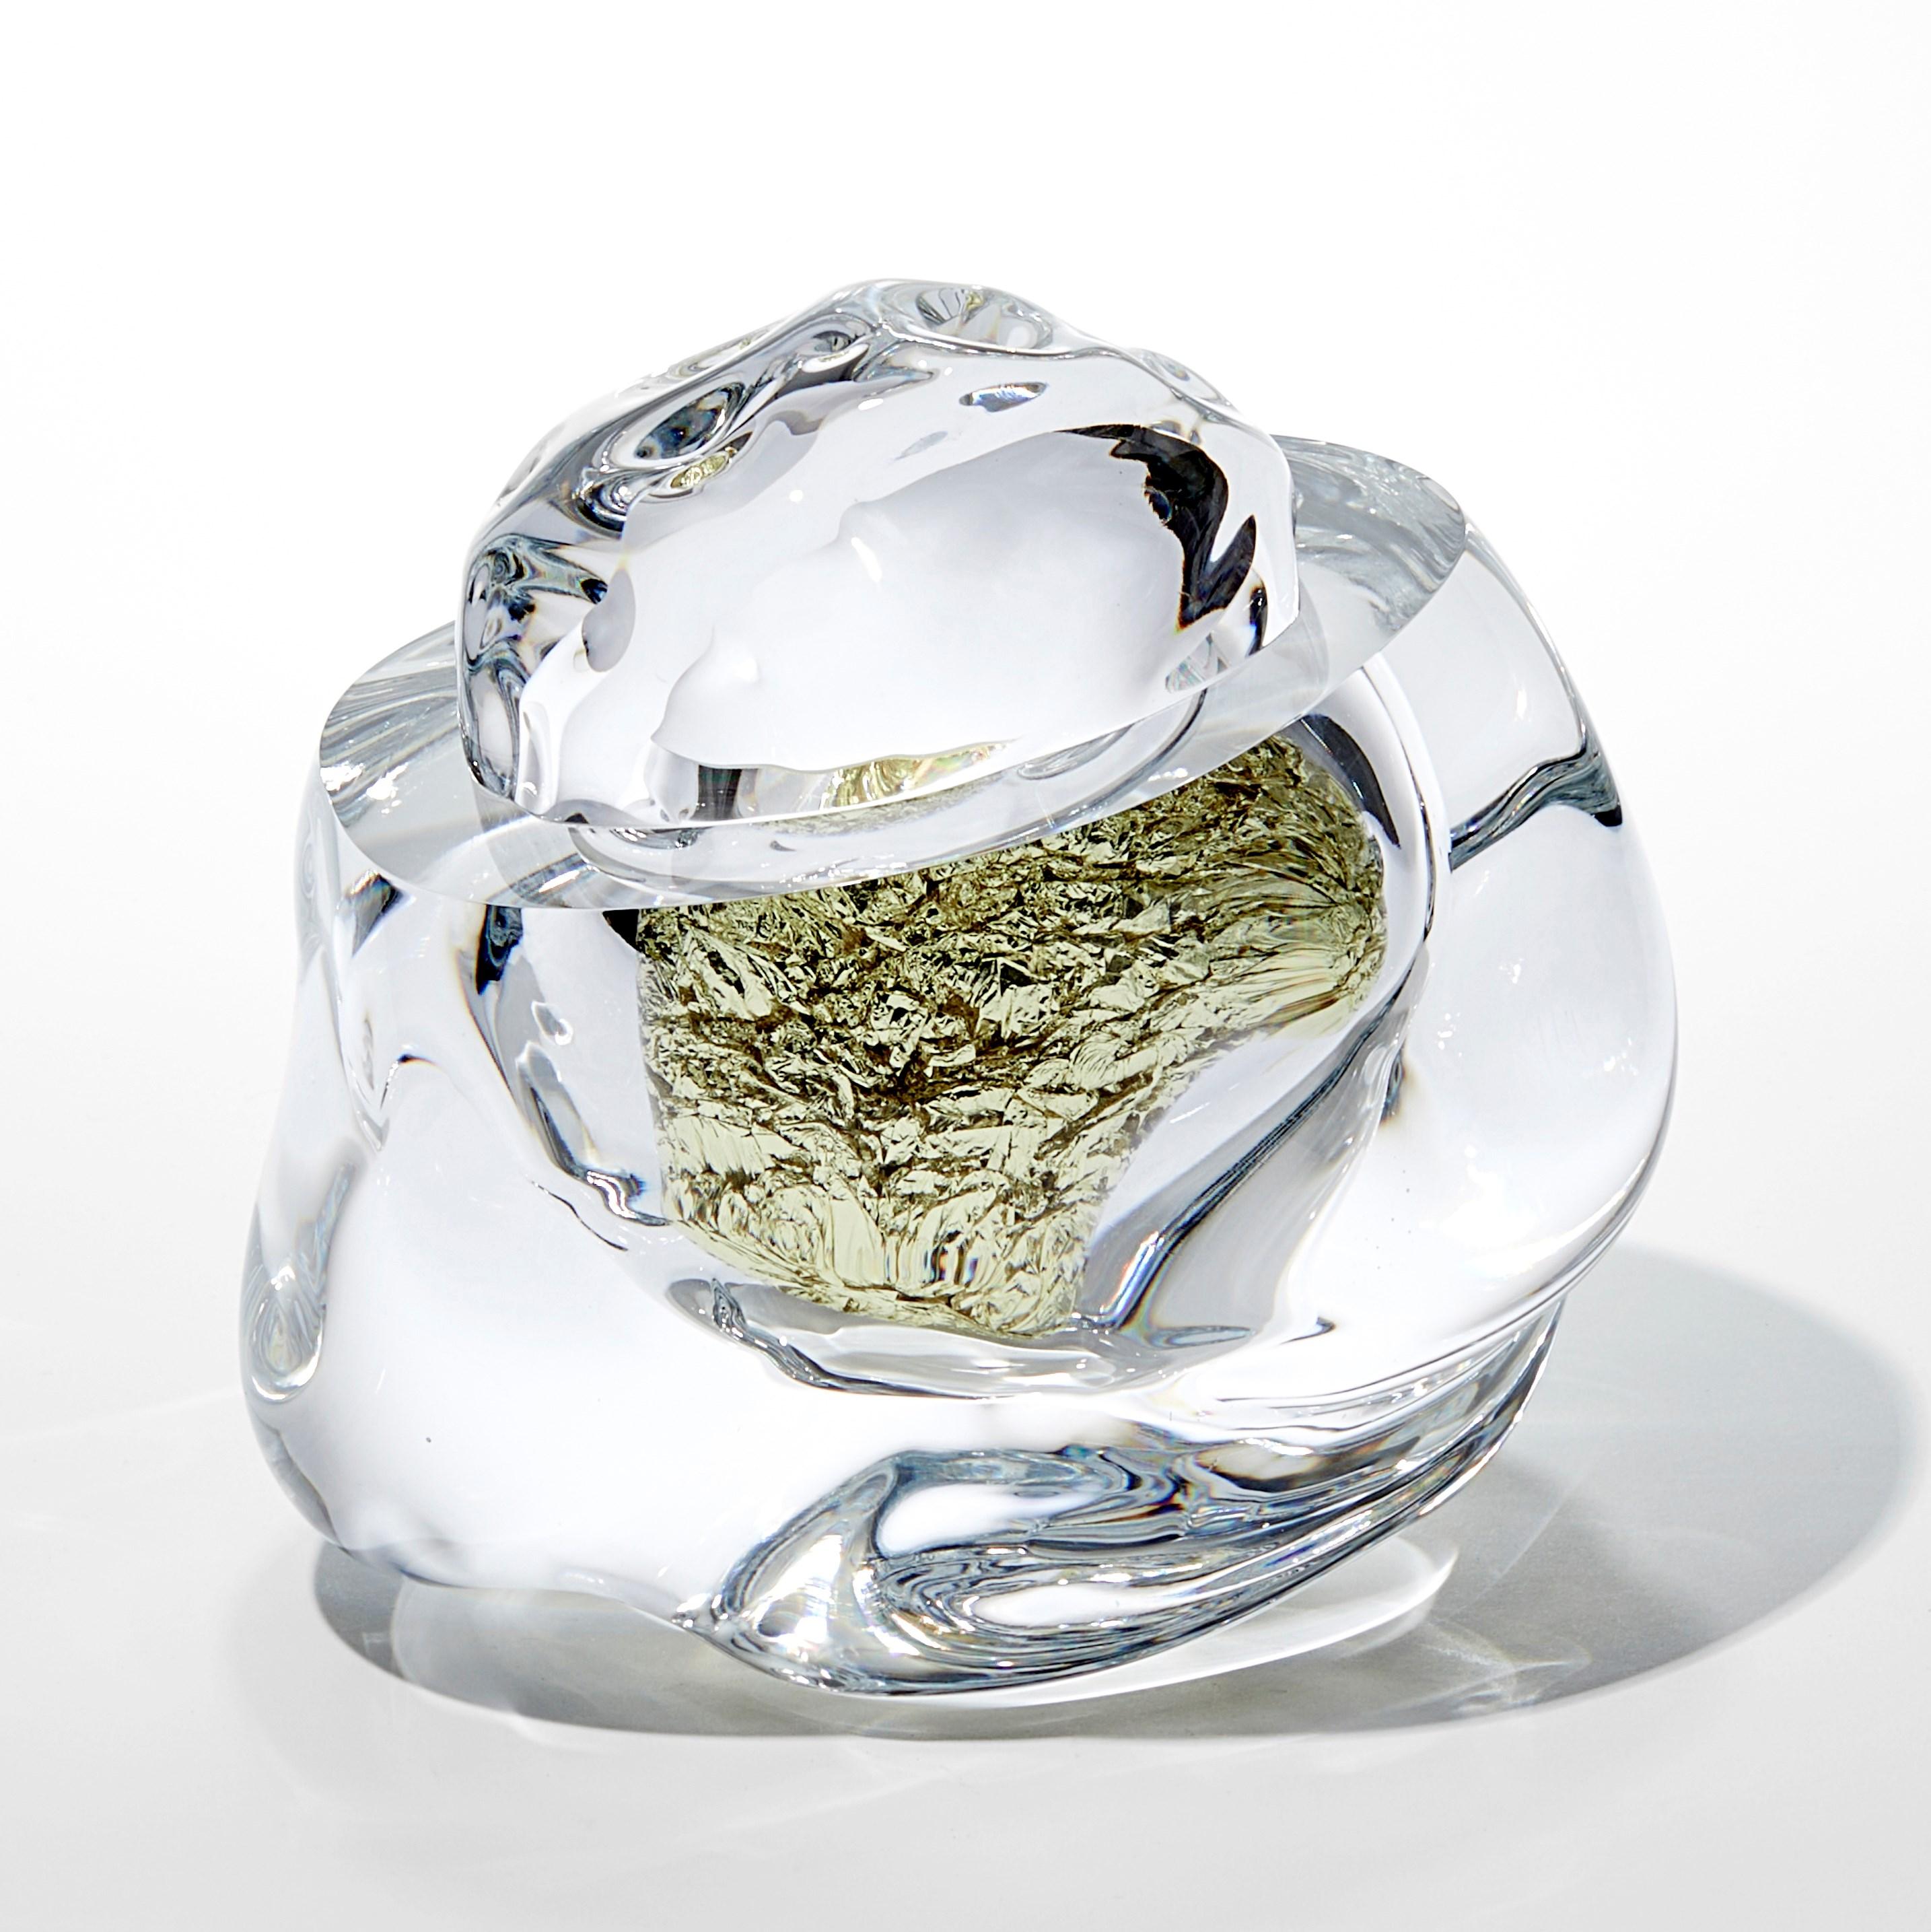 'Erratic J with 18ct Green Gold' is a handblown and cut glass sculpture created by the British artist, Anthony Scala.

The geological term 'erratic' refers to a stone or boulder that differs to its surrounding rock, that is believed to have been